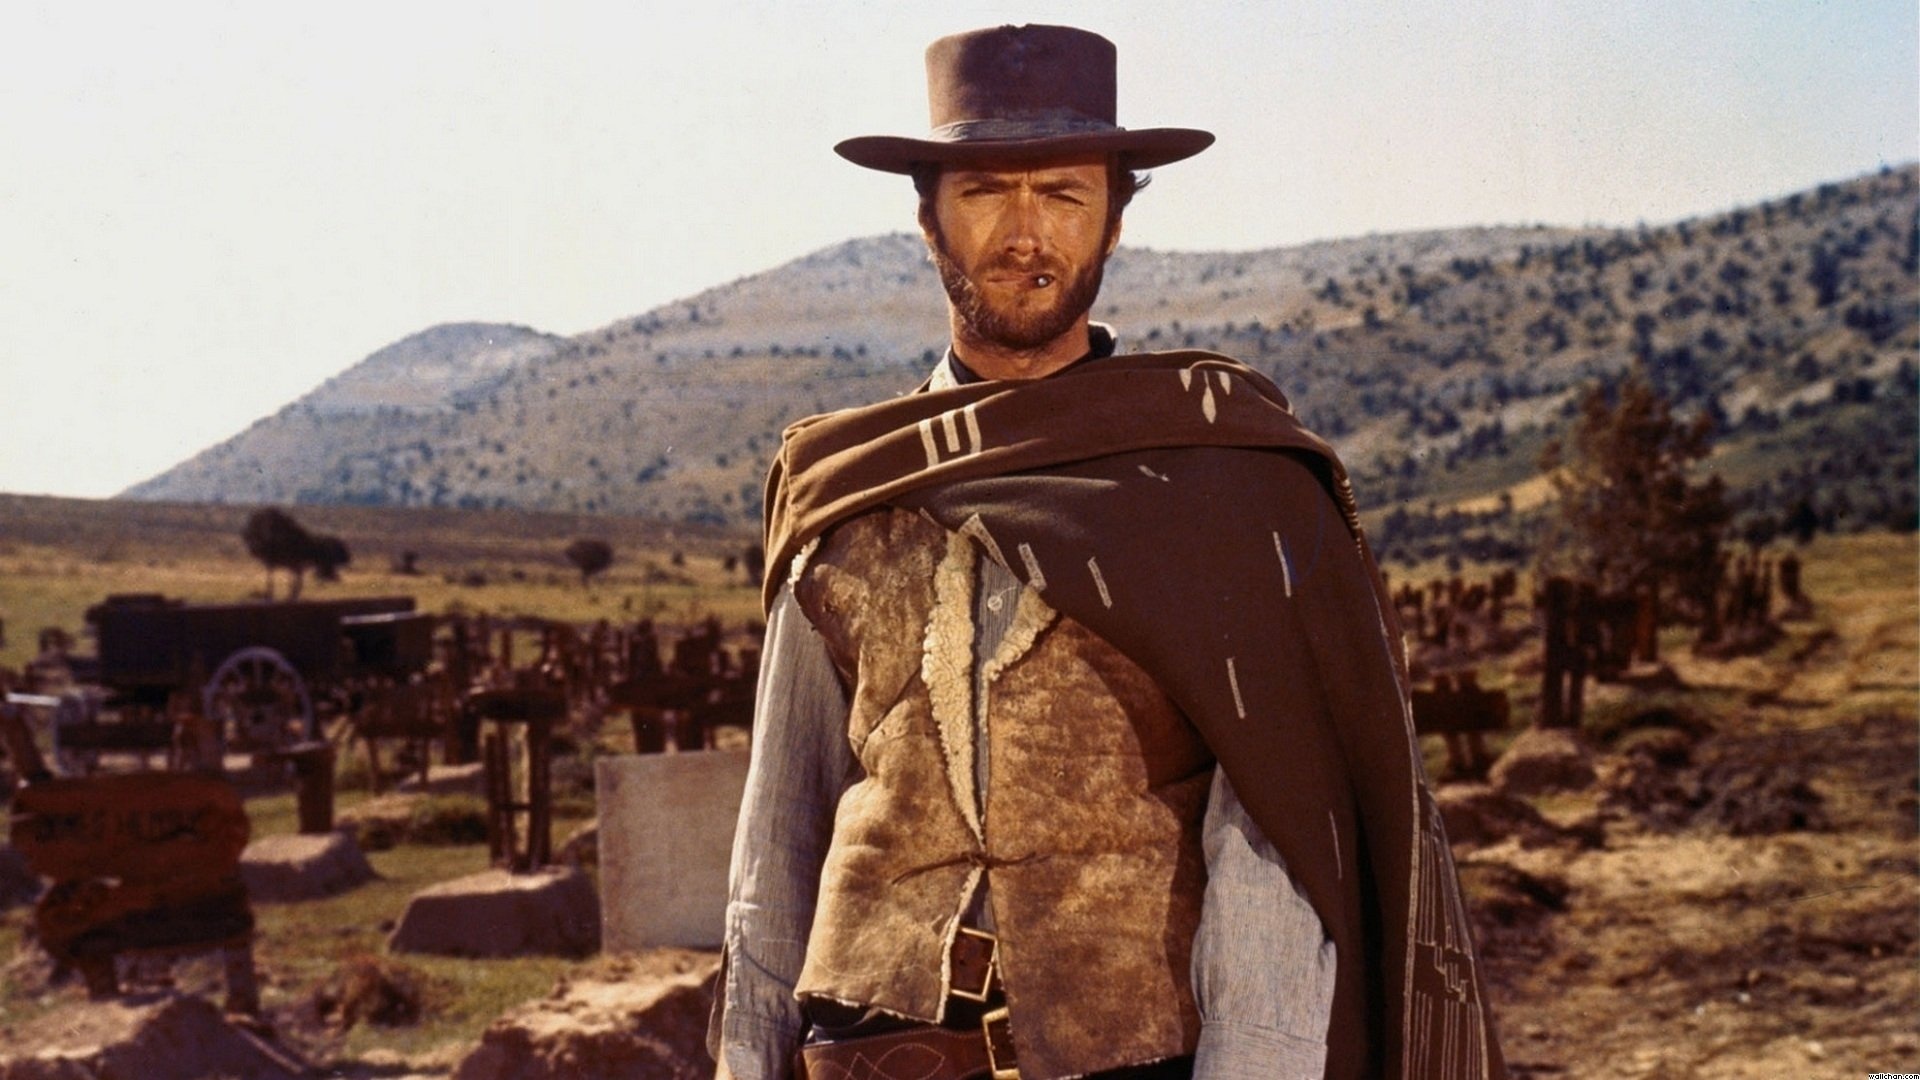 The Good, The Bad And The Ugly, Clint Eastwood, Iconic actor, Western genre, 1920x1080 Full HD Desktop